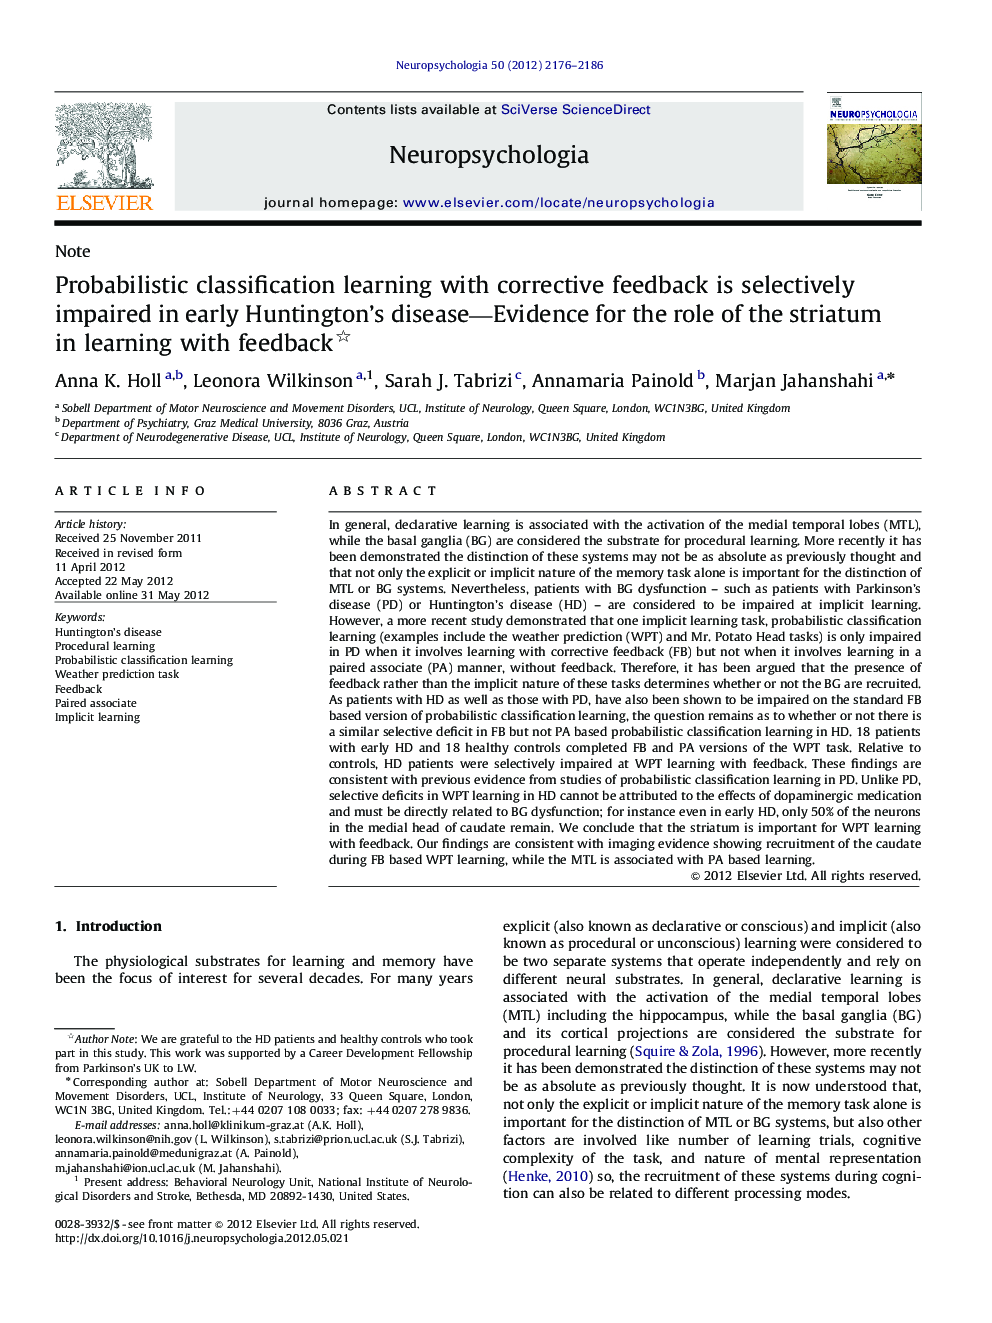 Probabilistic classification learning with corrective feedback is selectively impaired in early Huntington's disease-Evidence for the role of the striatum in learning with feedback